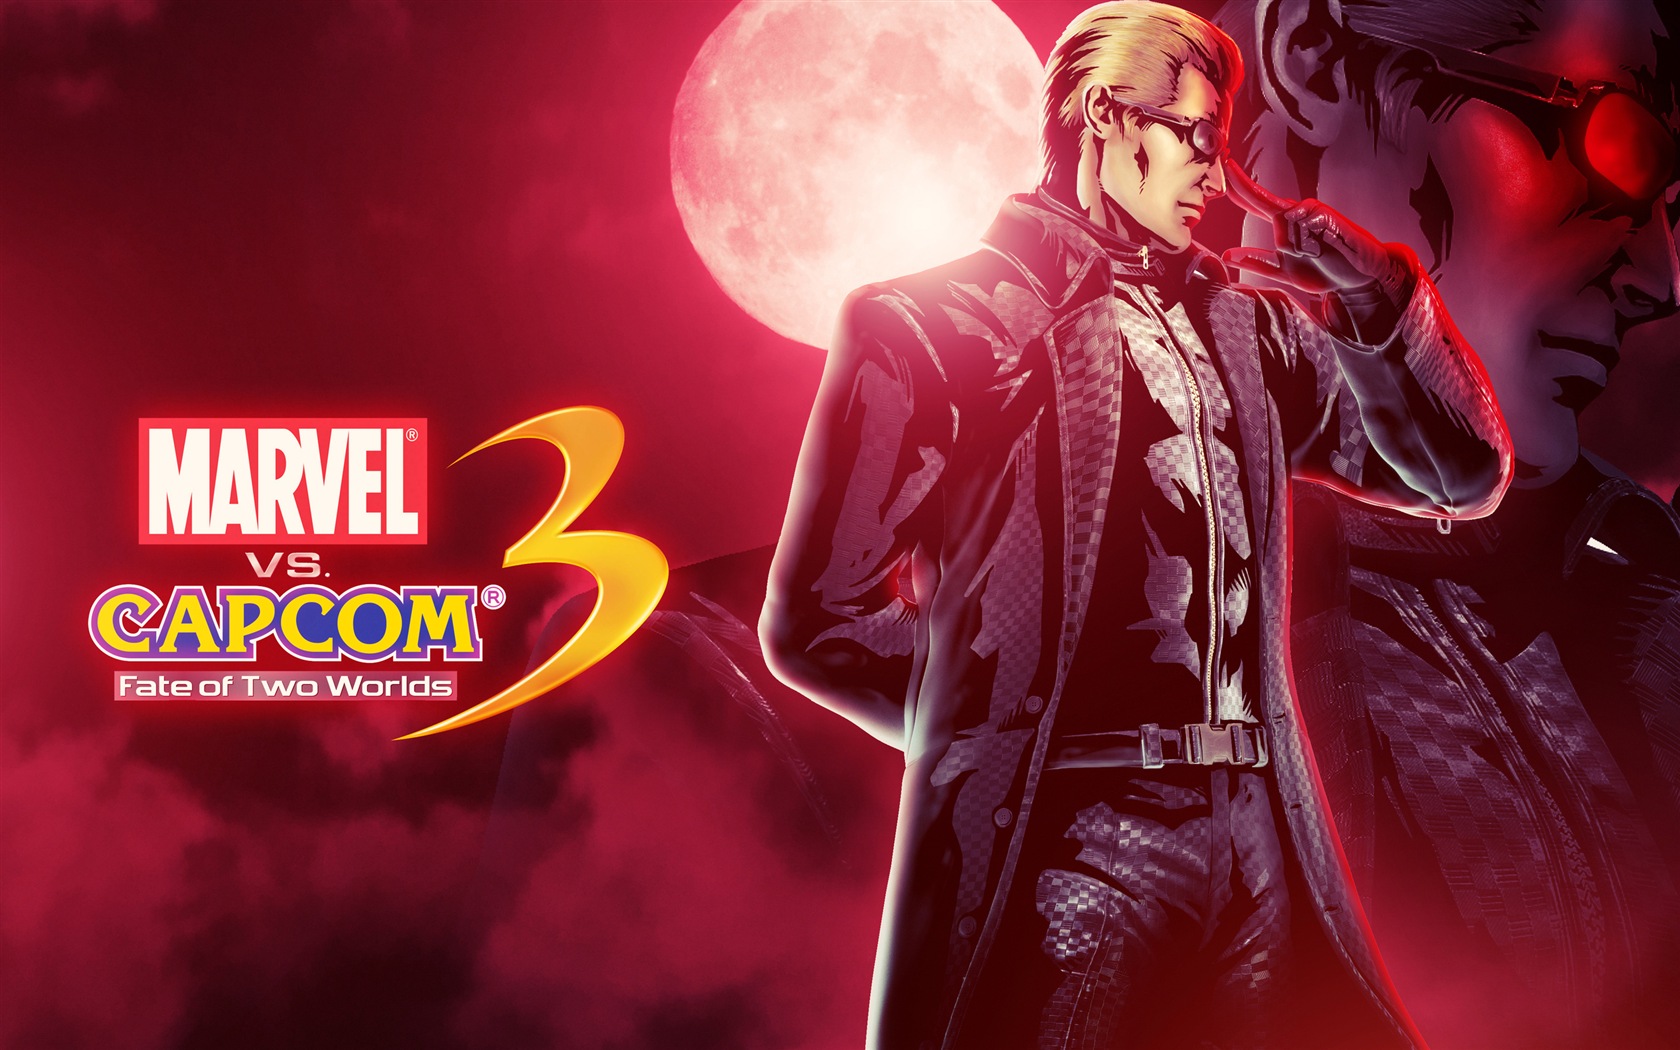 Marvel VS. Capcom 3: Fate of Two Worlds HD game wallpapers #9 - 1680x1050